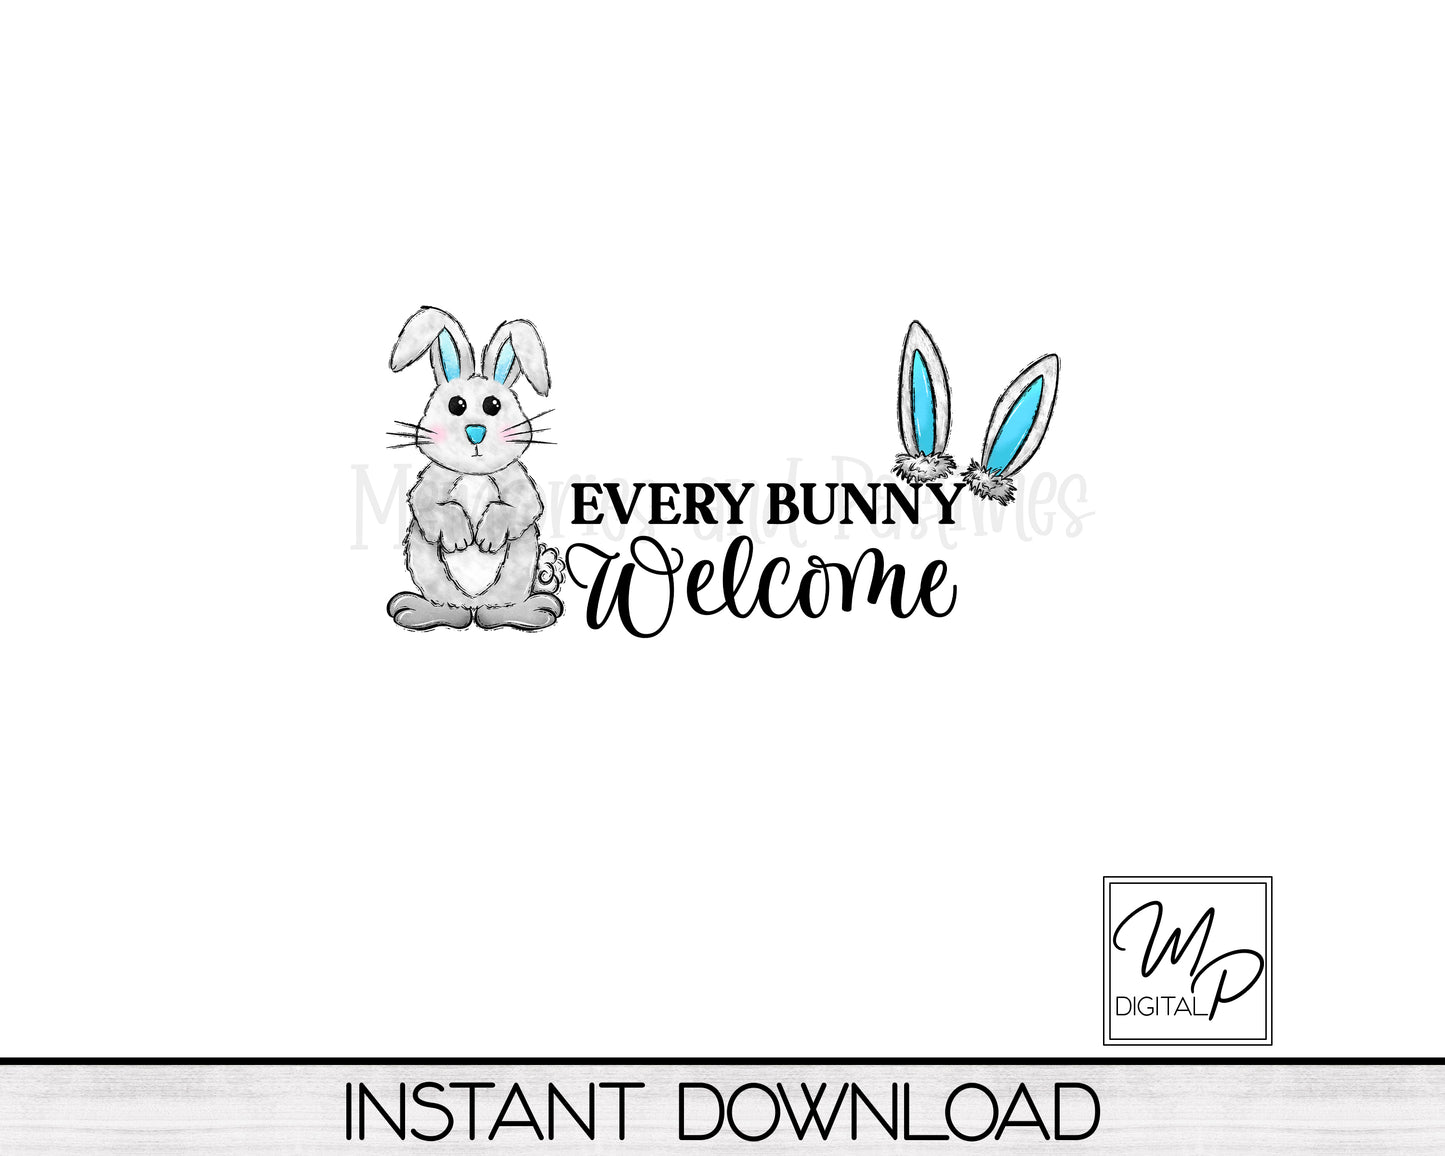 Easter Bunny Lumbar Pillow Cover PNG Sublimation Design, Every Bunny Welcome Digital Download